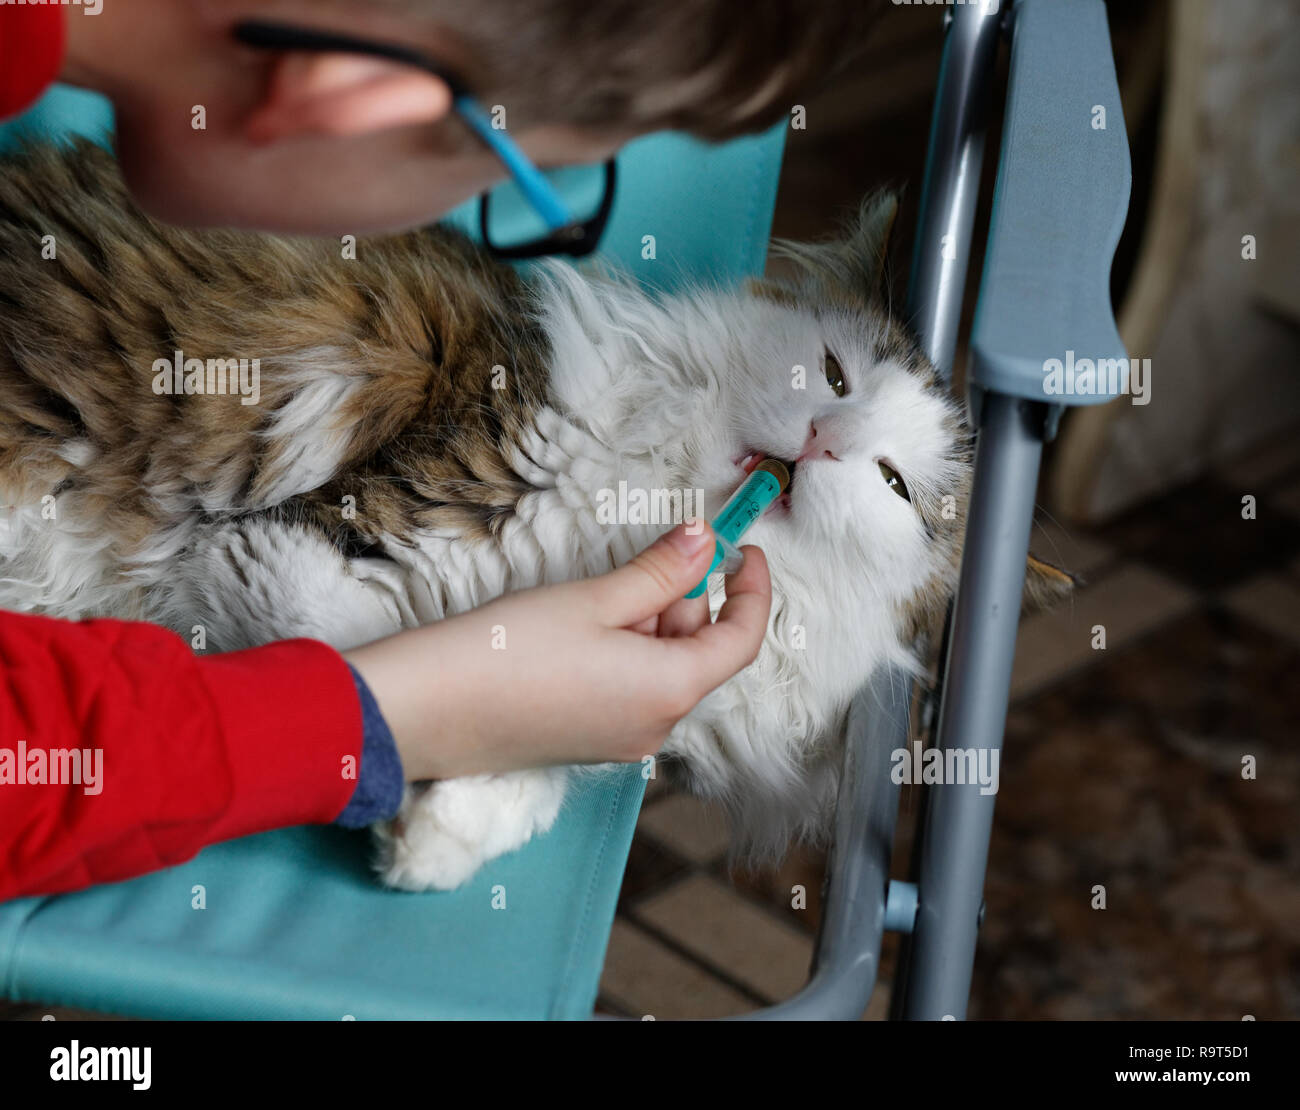 Young boy take care of his cat giving him a medicine using syringe Stock Photo